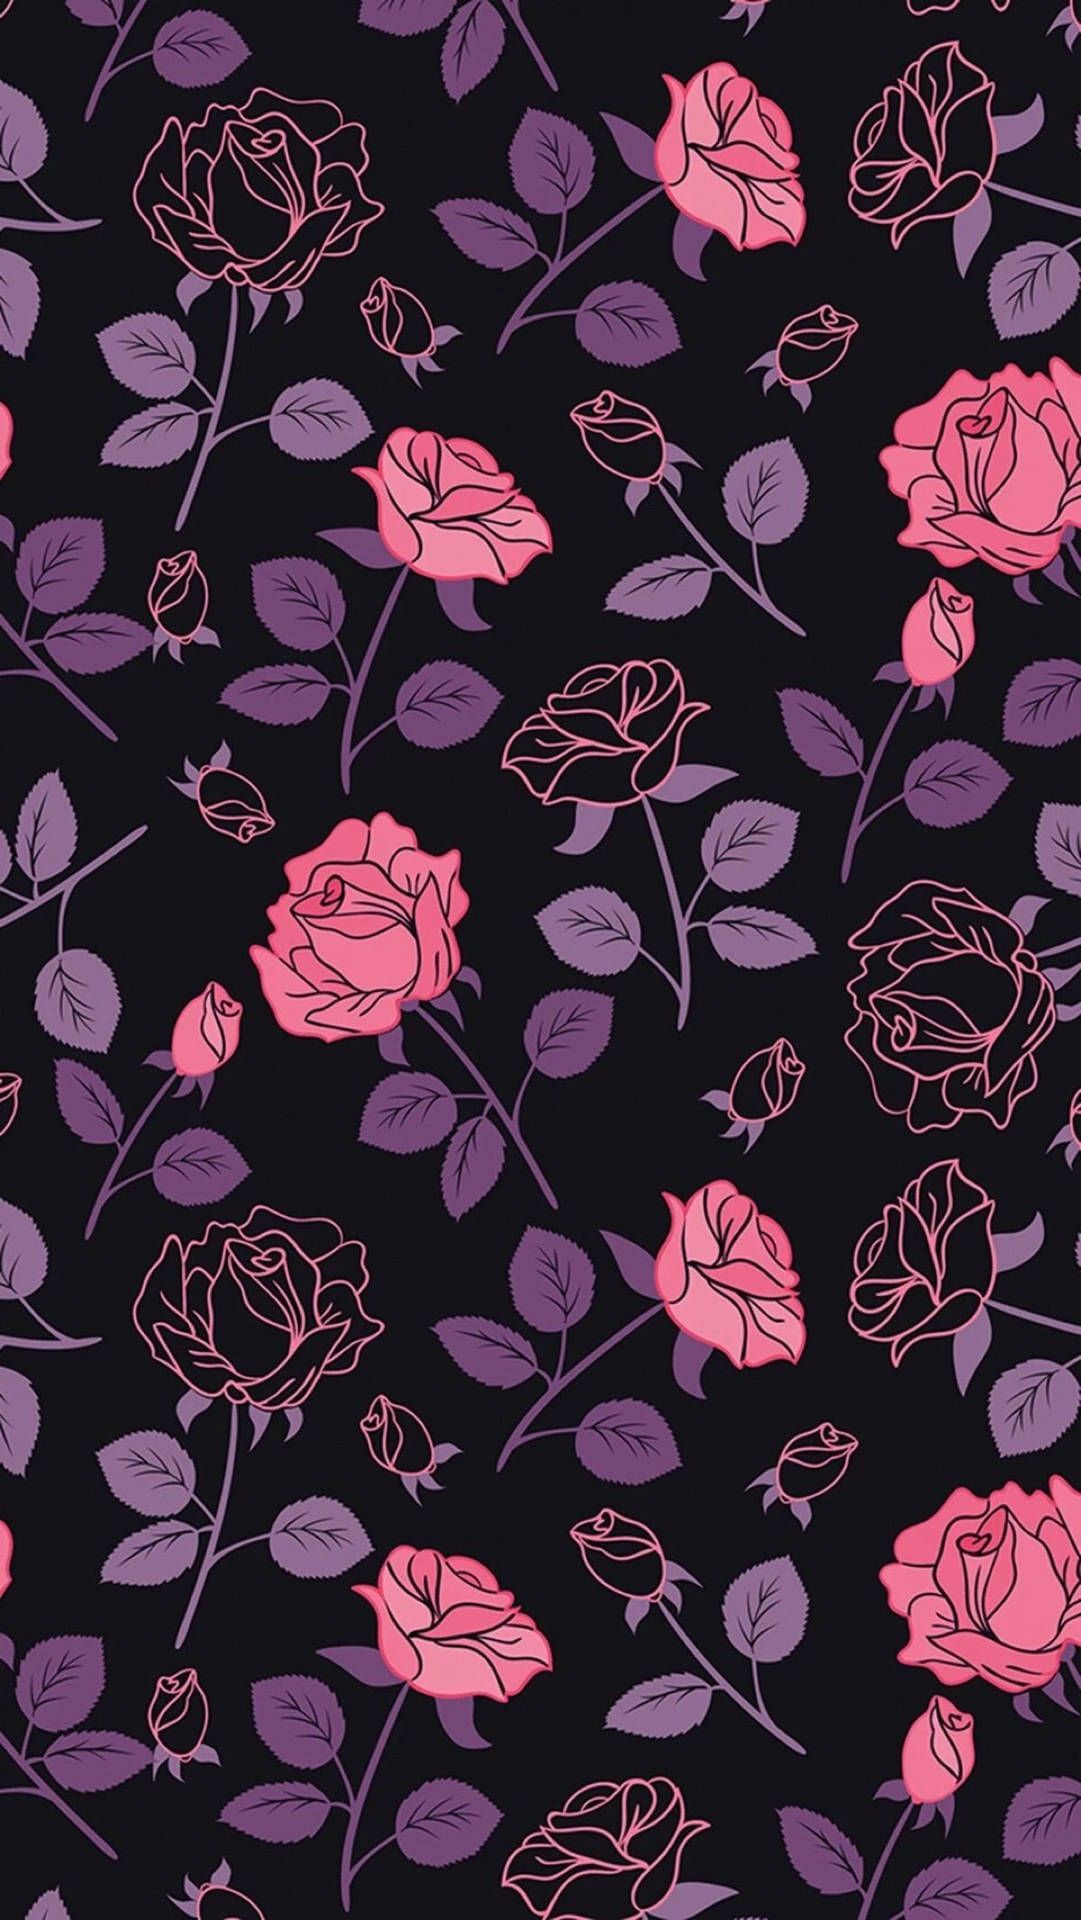 IPhone wallpaper with beautiful, rose, pink, purple, black, pattern, texture, aesthetic, background, girly, vintage, retro, wallpaper, texture, pattern, roses, flowers, pink, purple, black, aesthetic, girly, vintage, retro, background, phone, phone background, wallpaper, phone wallpaper, phone background, aesthetic, girly, vintage, retro, background, phone, phone background, wallpaper, phone wallpaper, phone background, aesthetic, girly, vintage, retro - Gothic